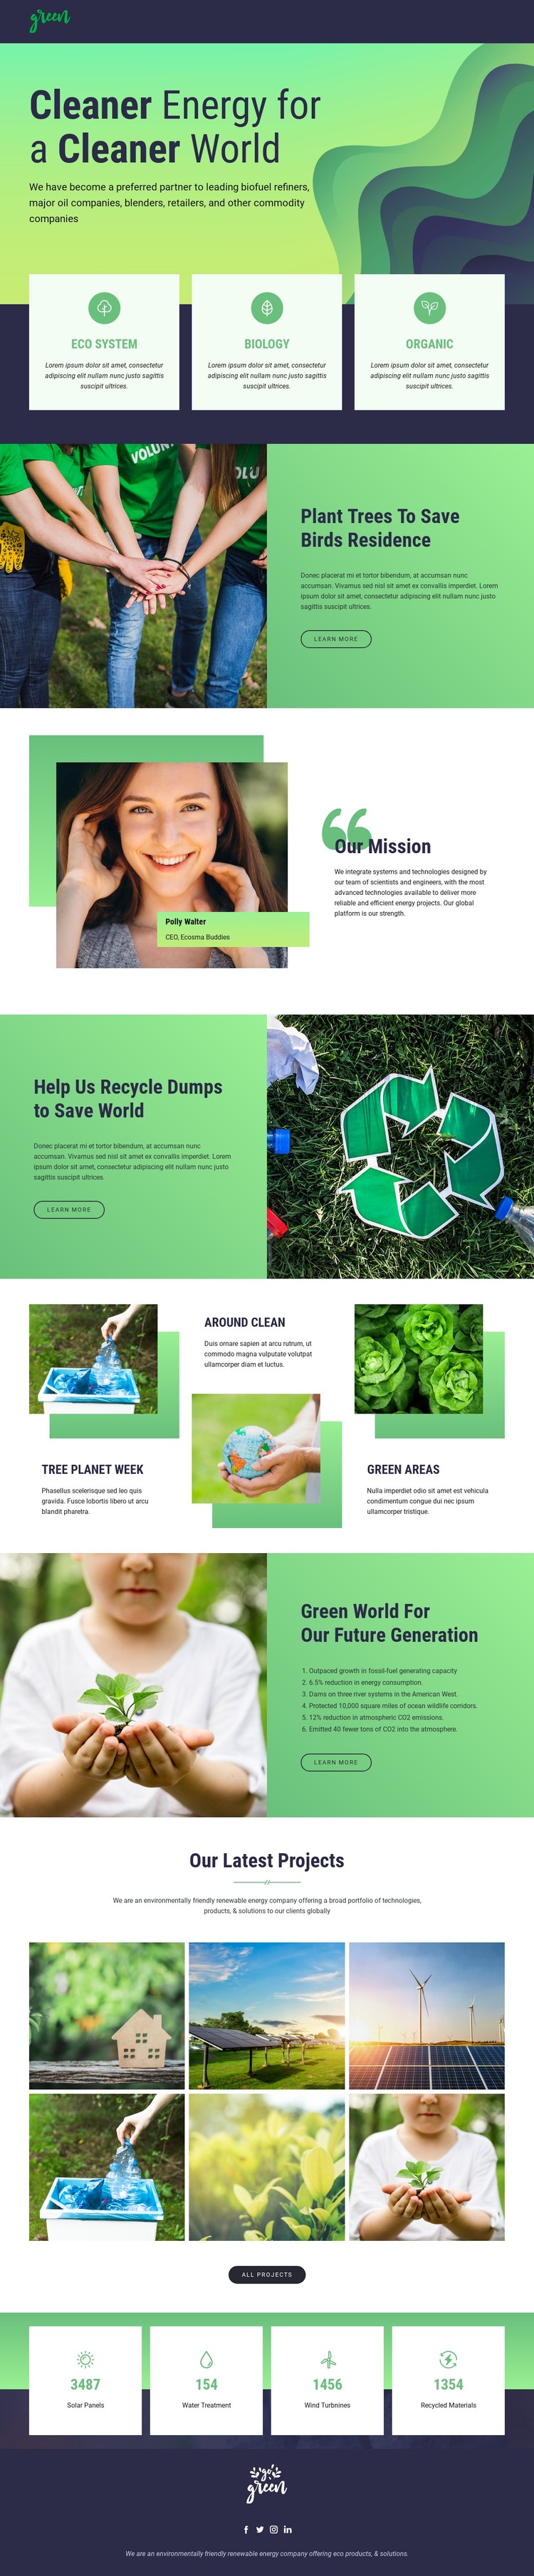 Clean energy to save nature Webflow Template Alternative